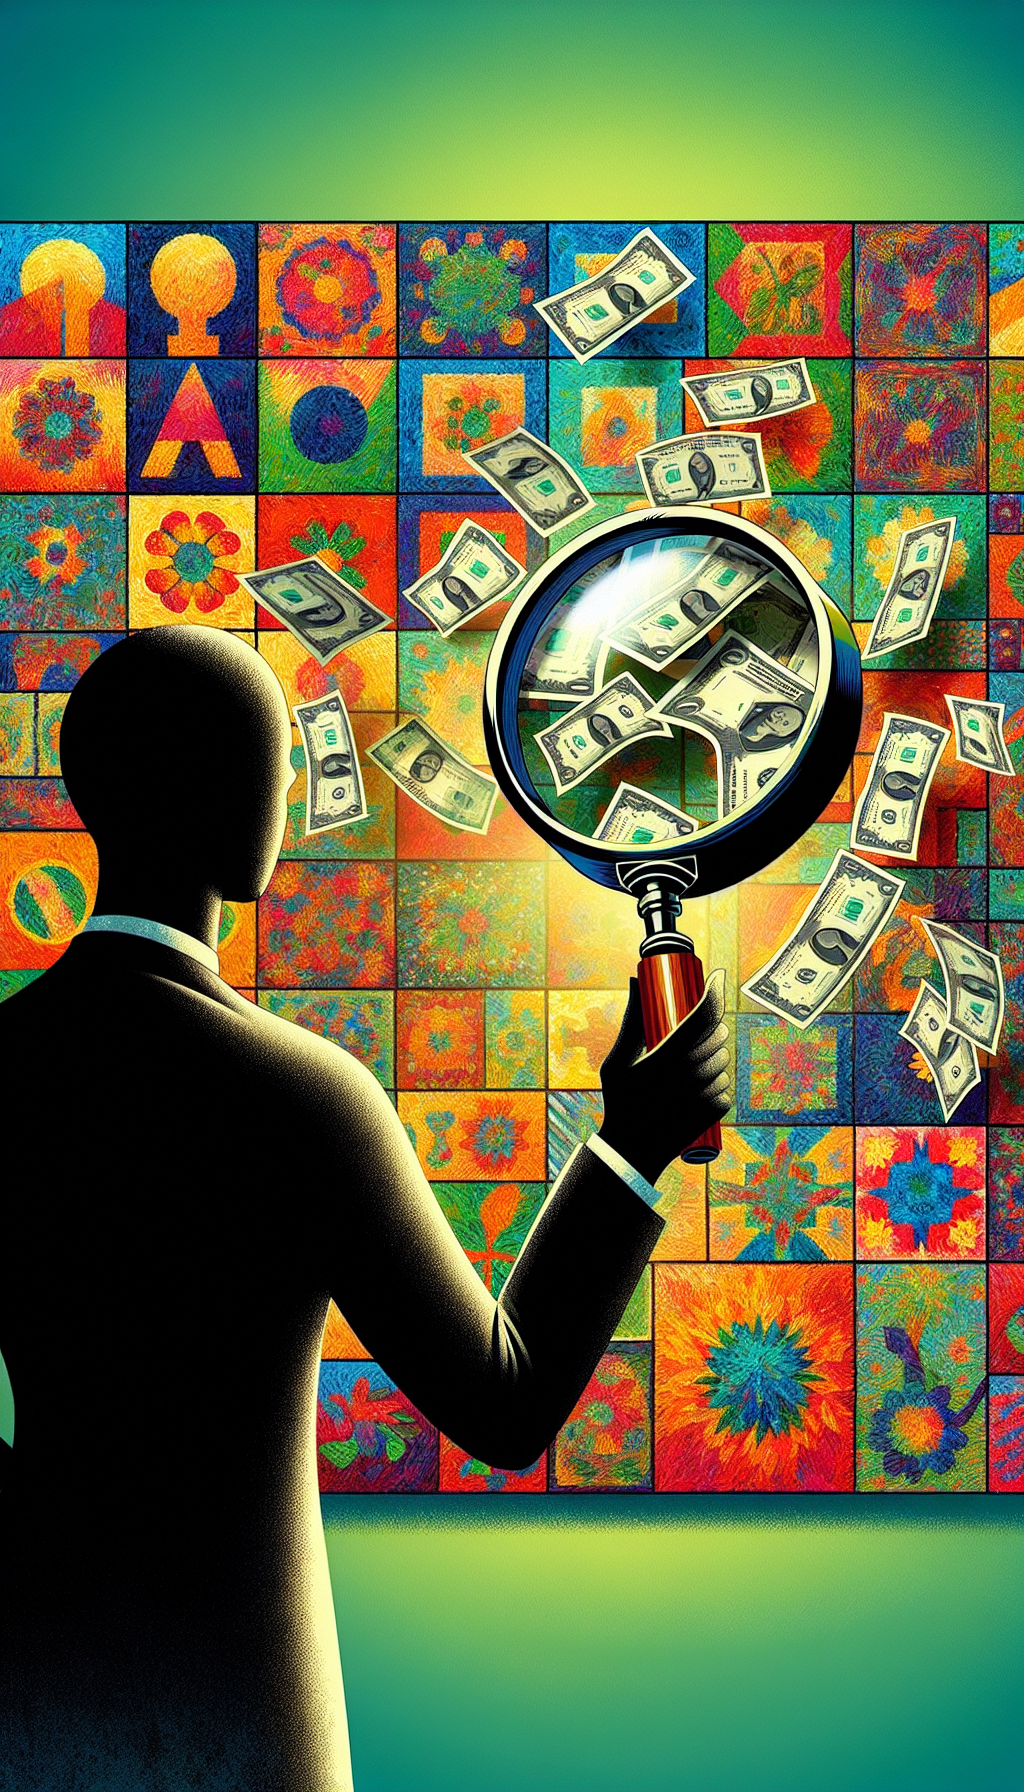 An illustration showcasing a magnifying glass peering over a vibrant patchwork of classic art pieces, where each patchwork piece transforms into crisp dollar bills upon closer inspection. The magnifying glass is held by a silhouetted figure, symbolizing the appraiser, with a subtle balance scale embedded in the glass, hinting at the valuation process inherent in artwork appraisal.